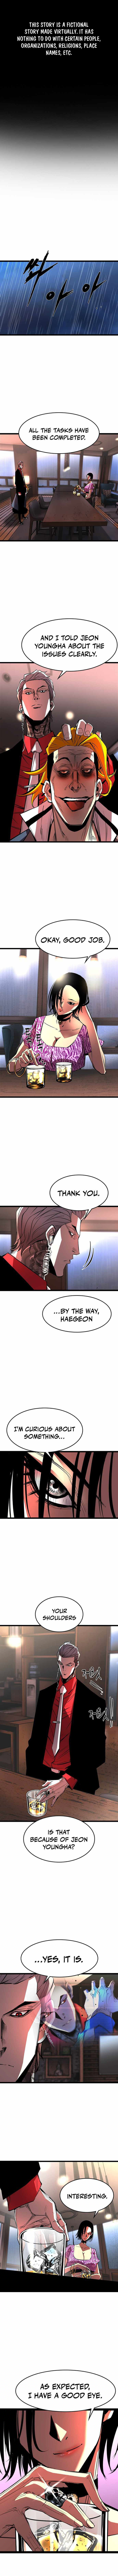 Hanlim Gym Chapter 74 page 3